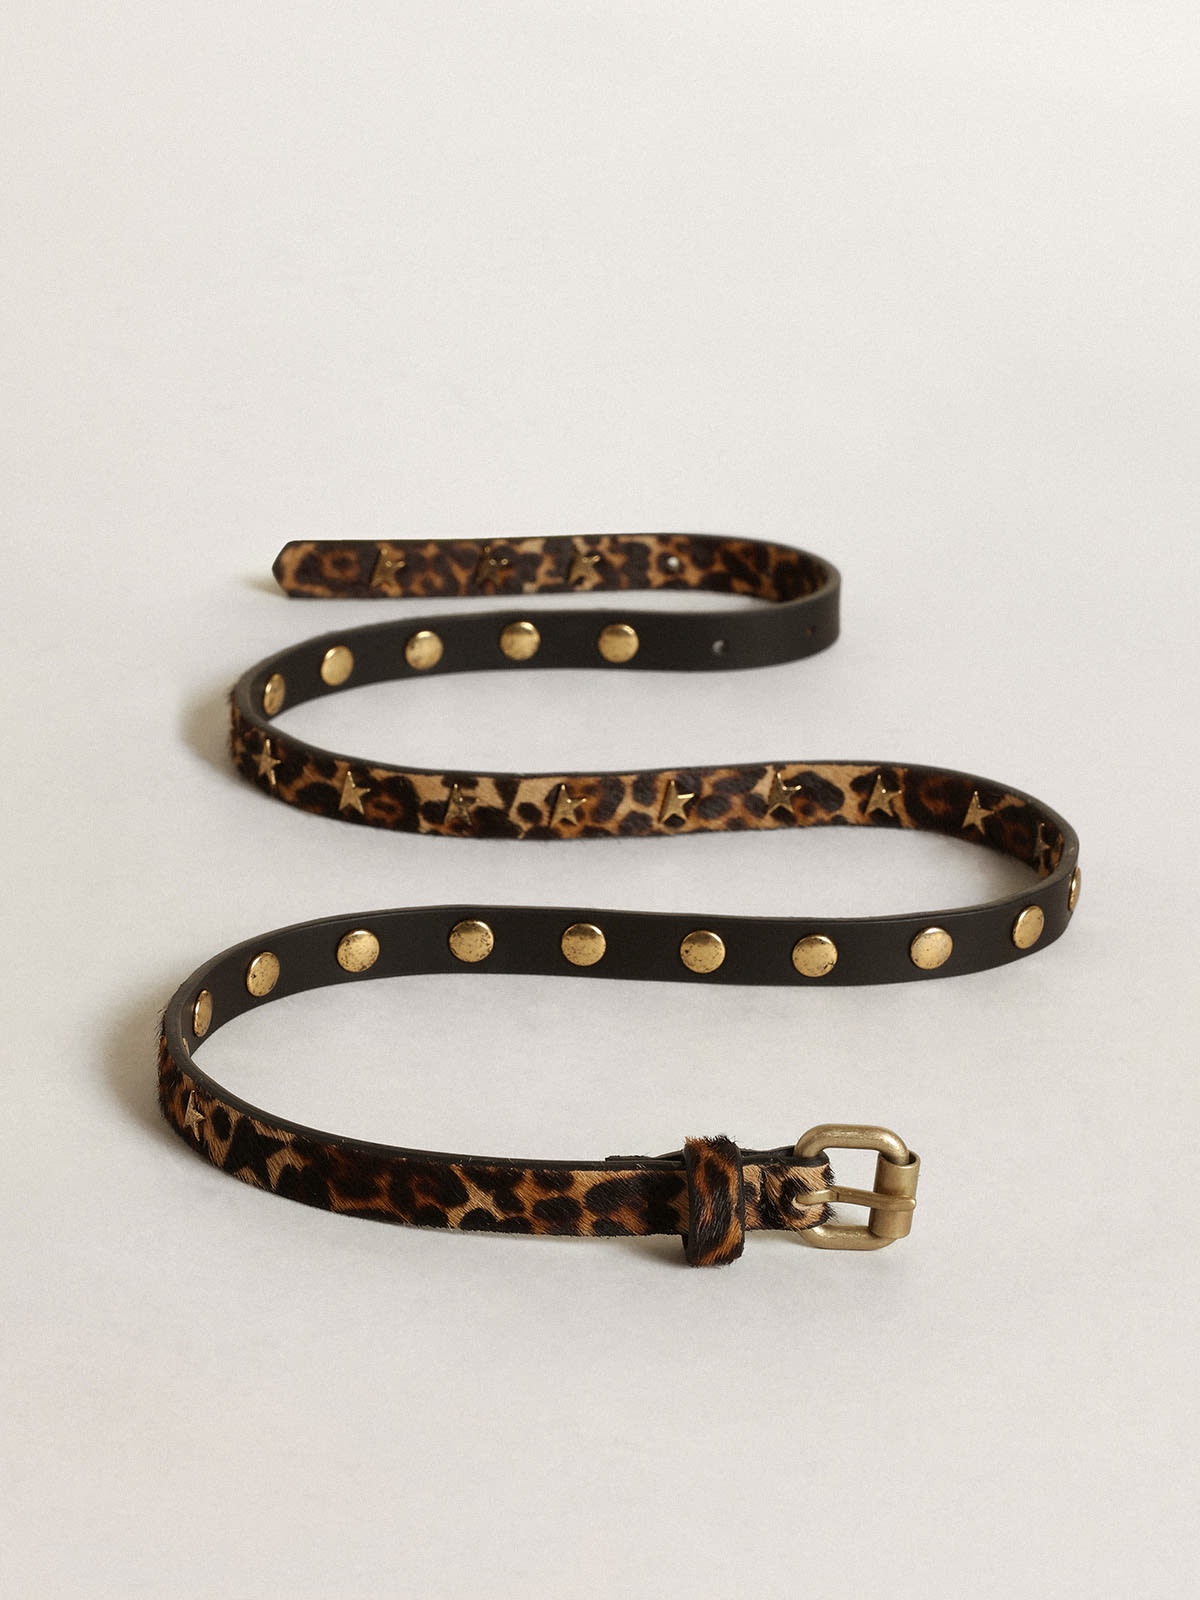 Women's belt in black and brown leopard print pony skin with studs - 4